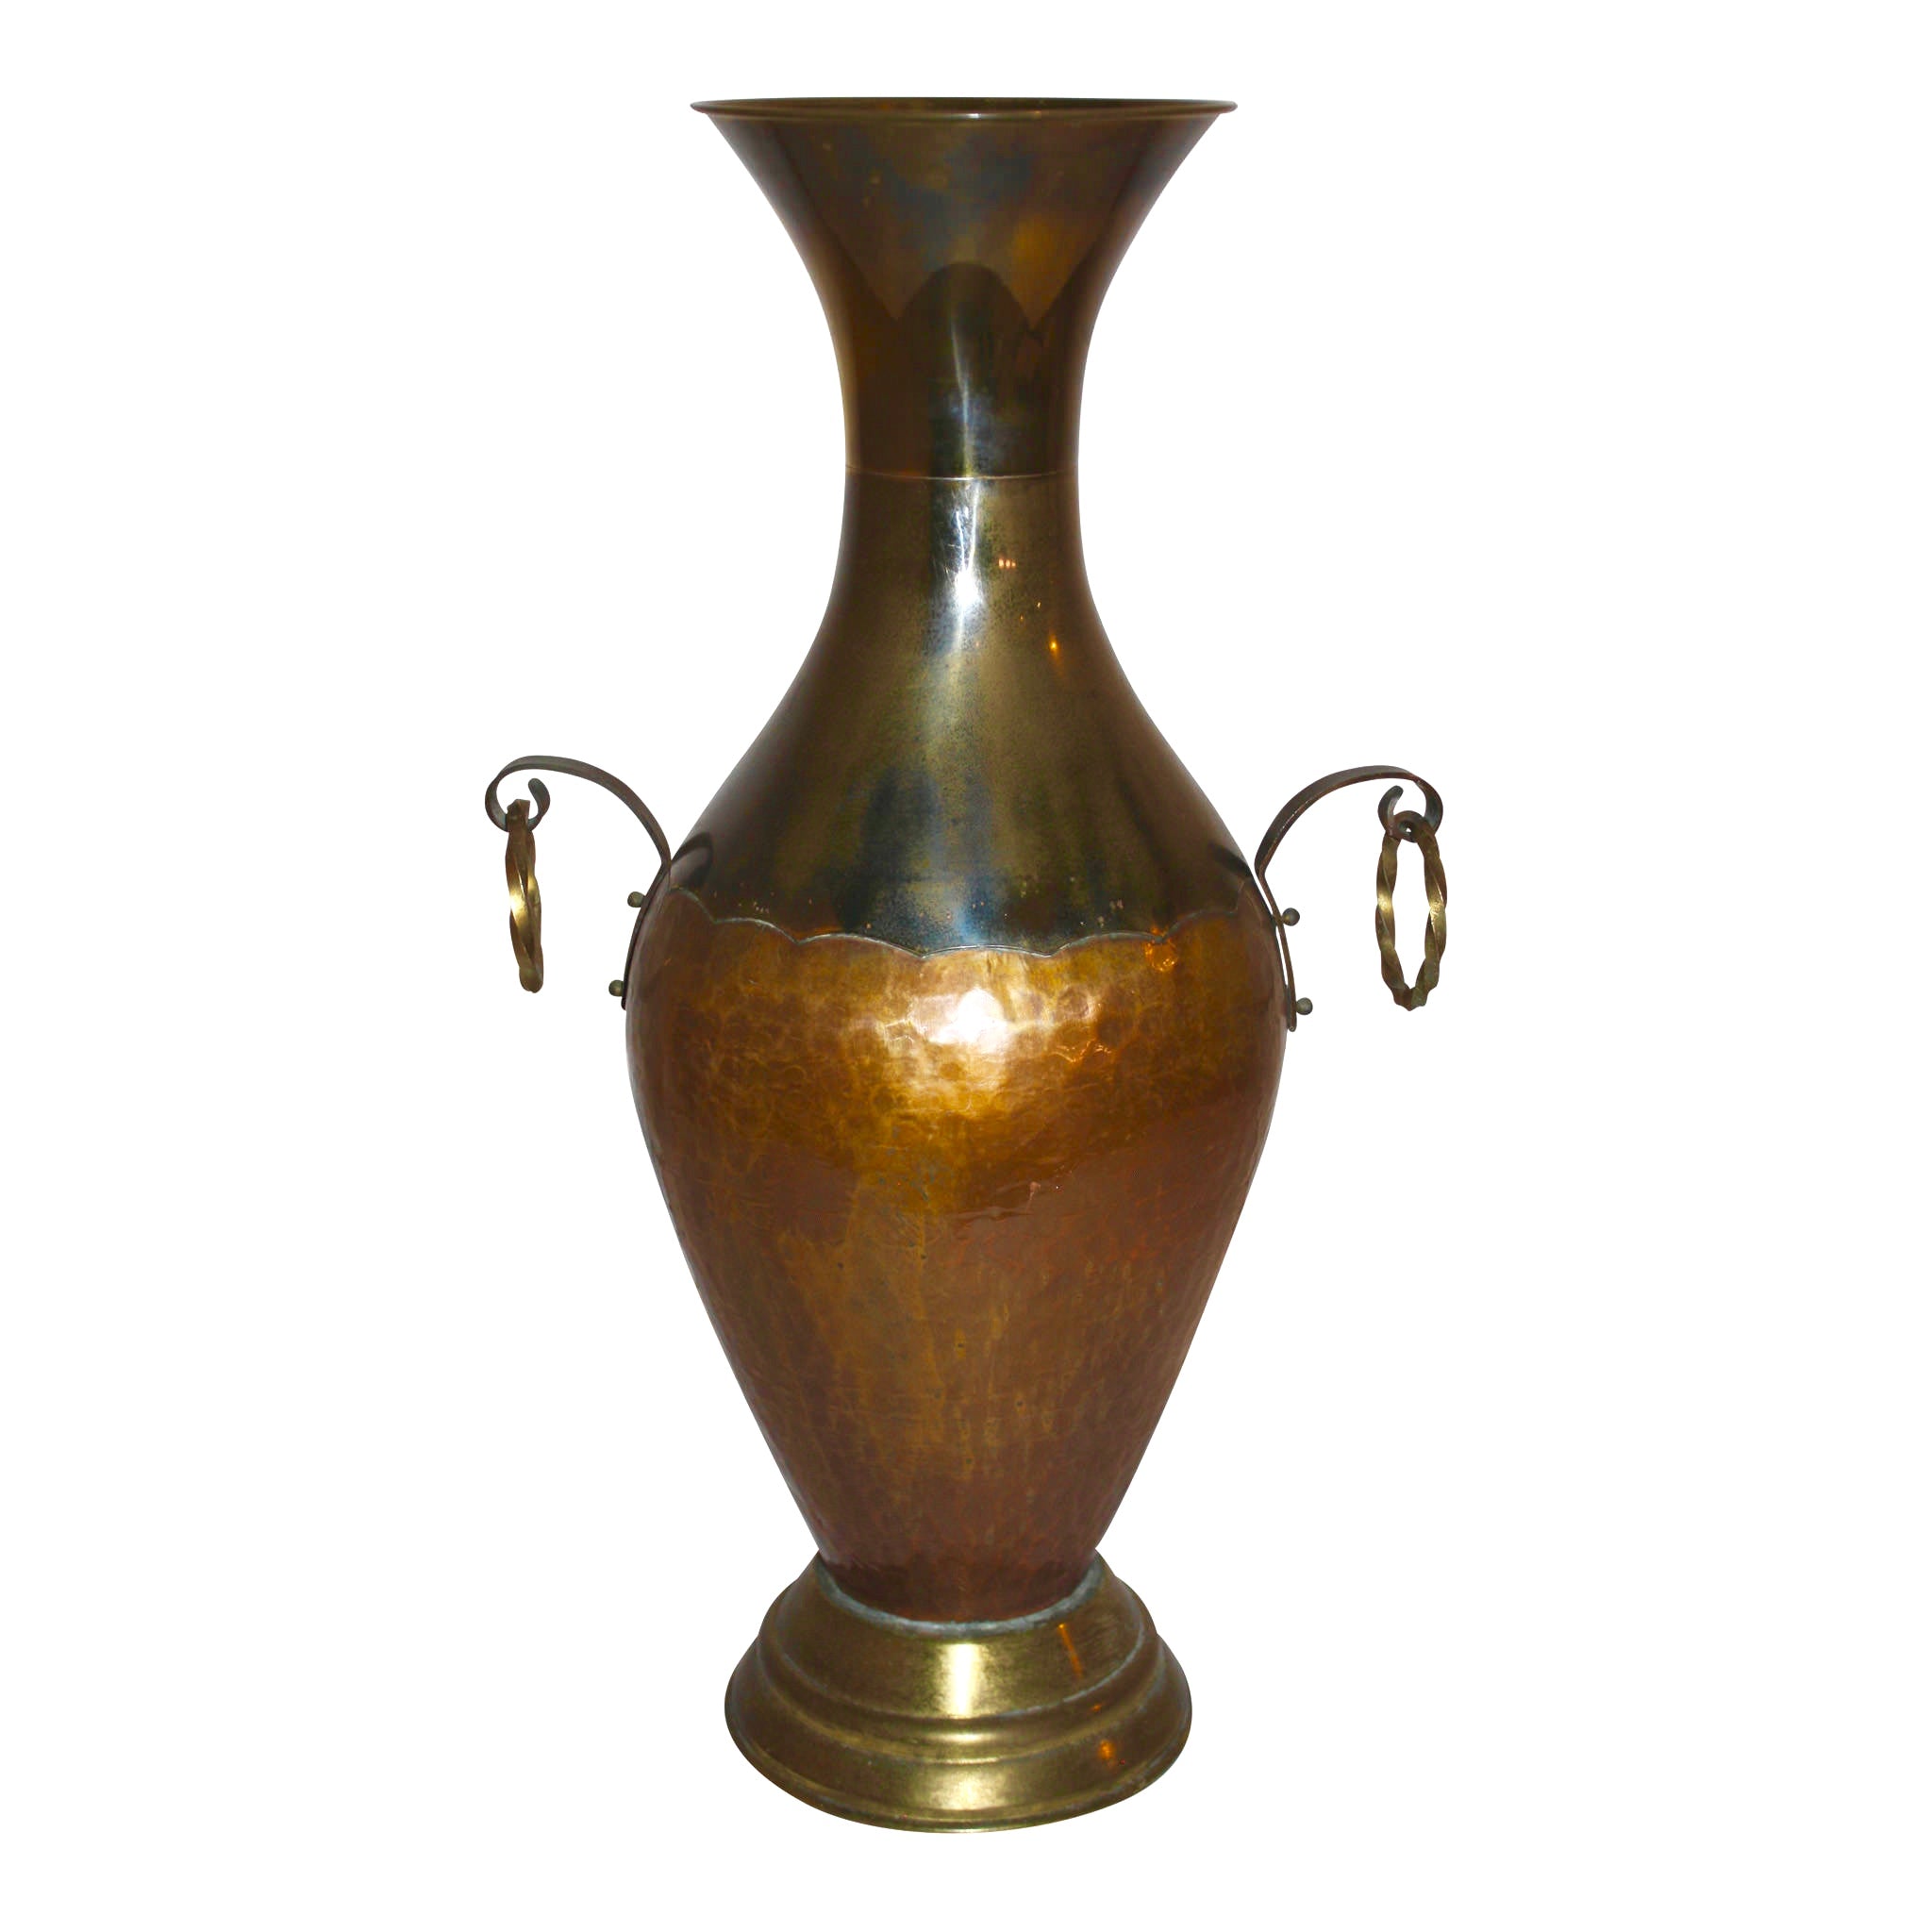 Two-Tone Copper and Brass Vase with Handles